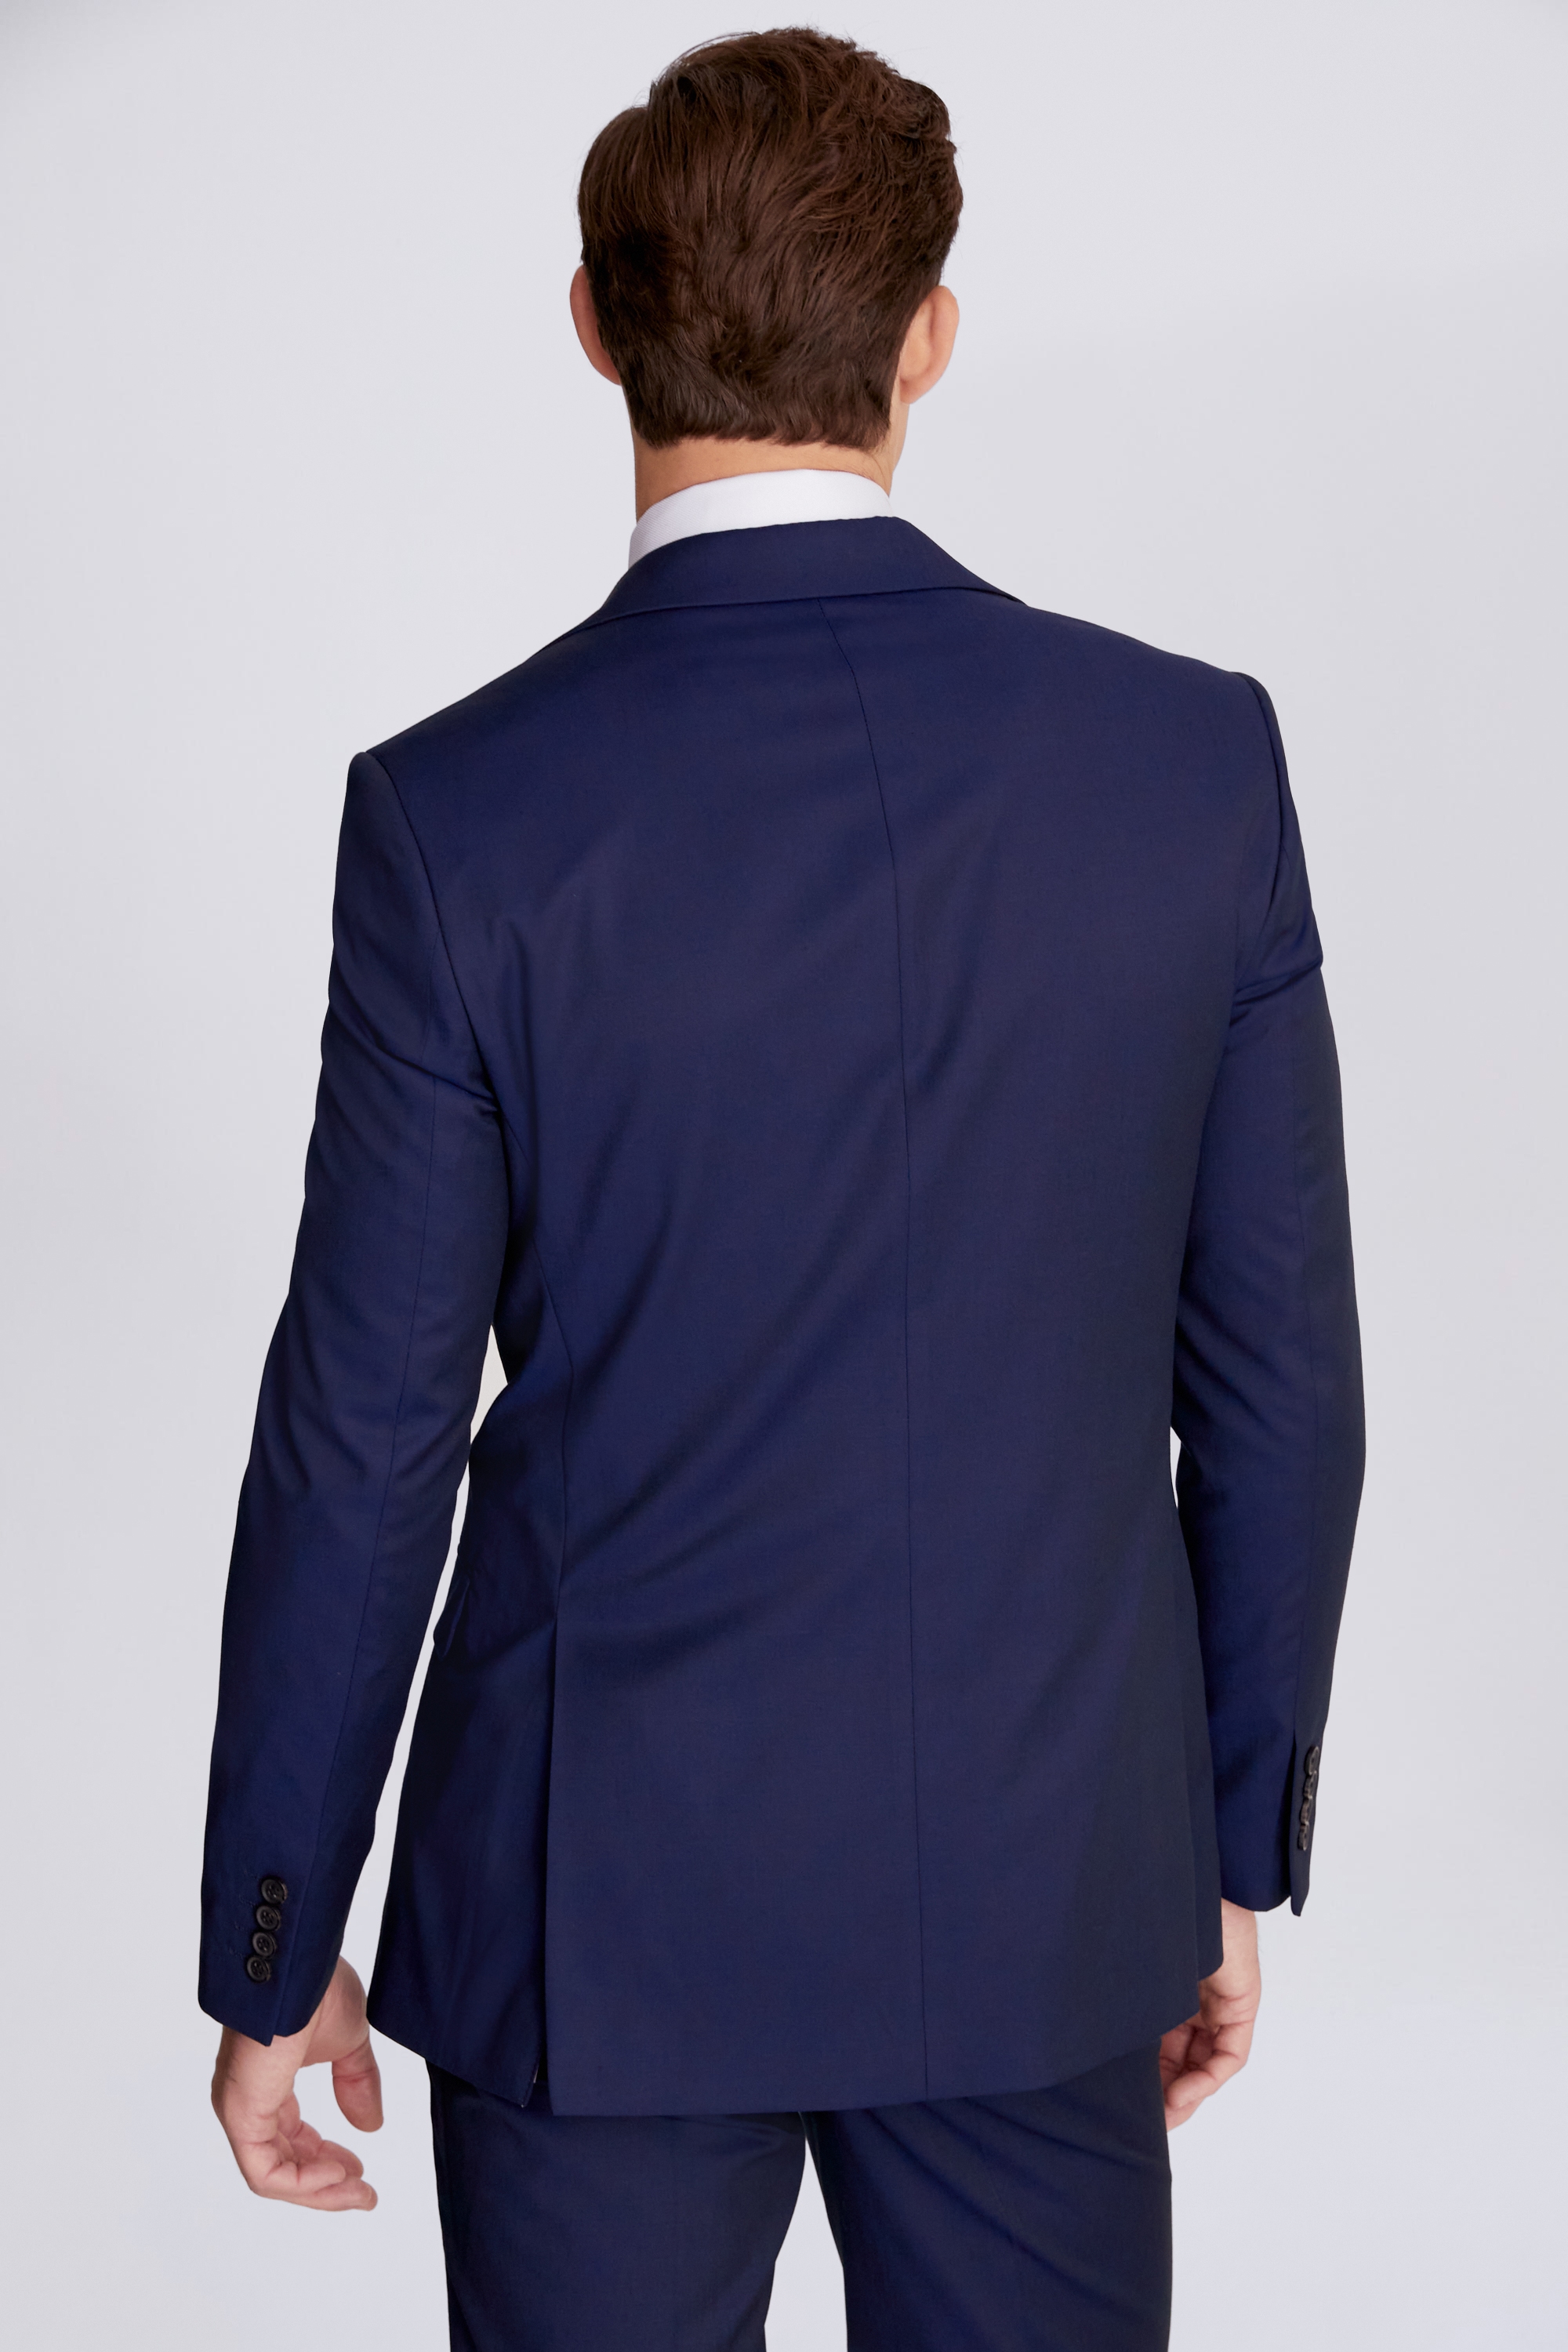 Tailored Fit Ink Stretch Jacket | Buy Online at Moss